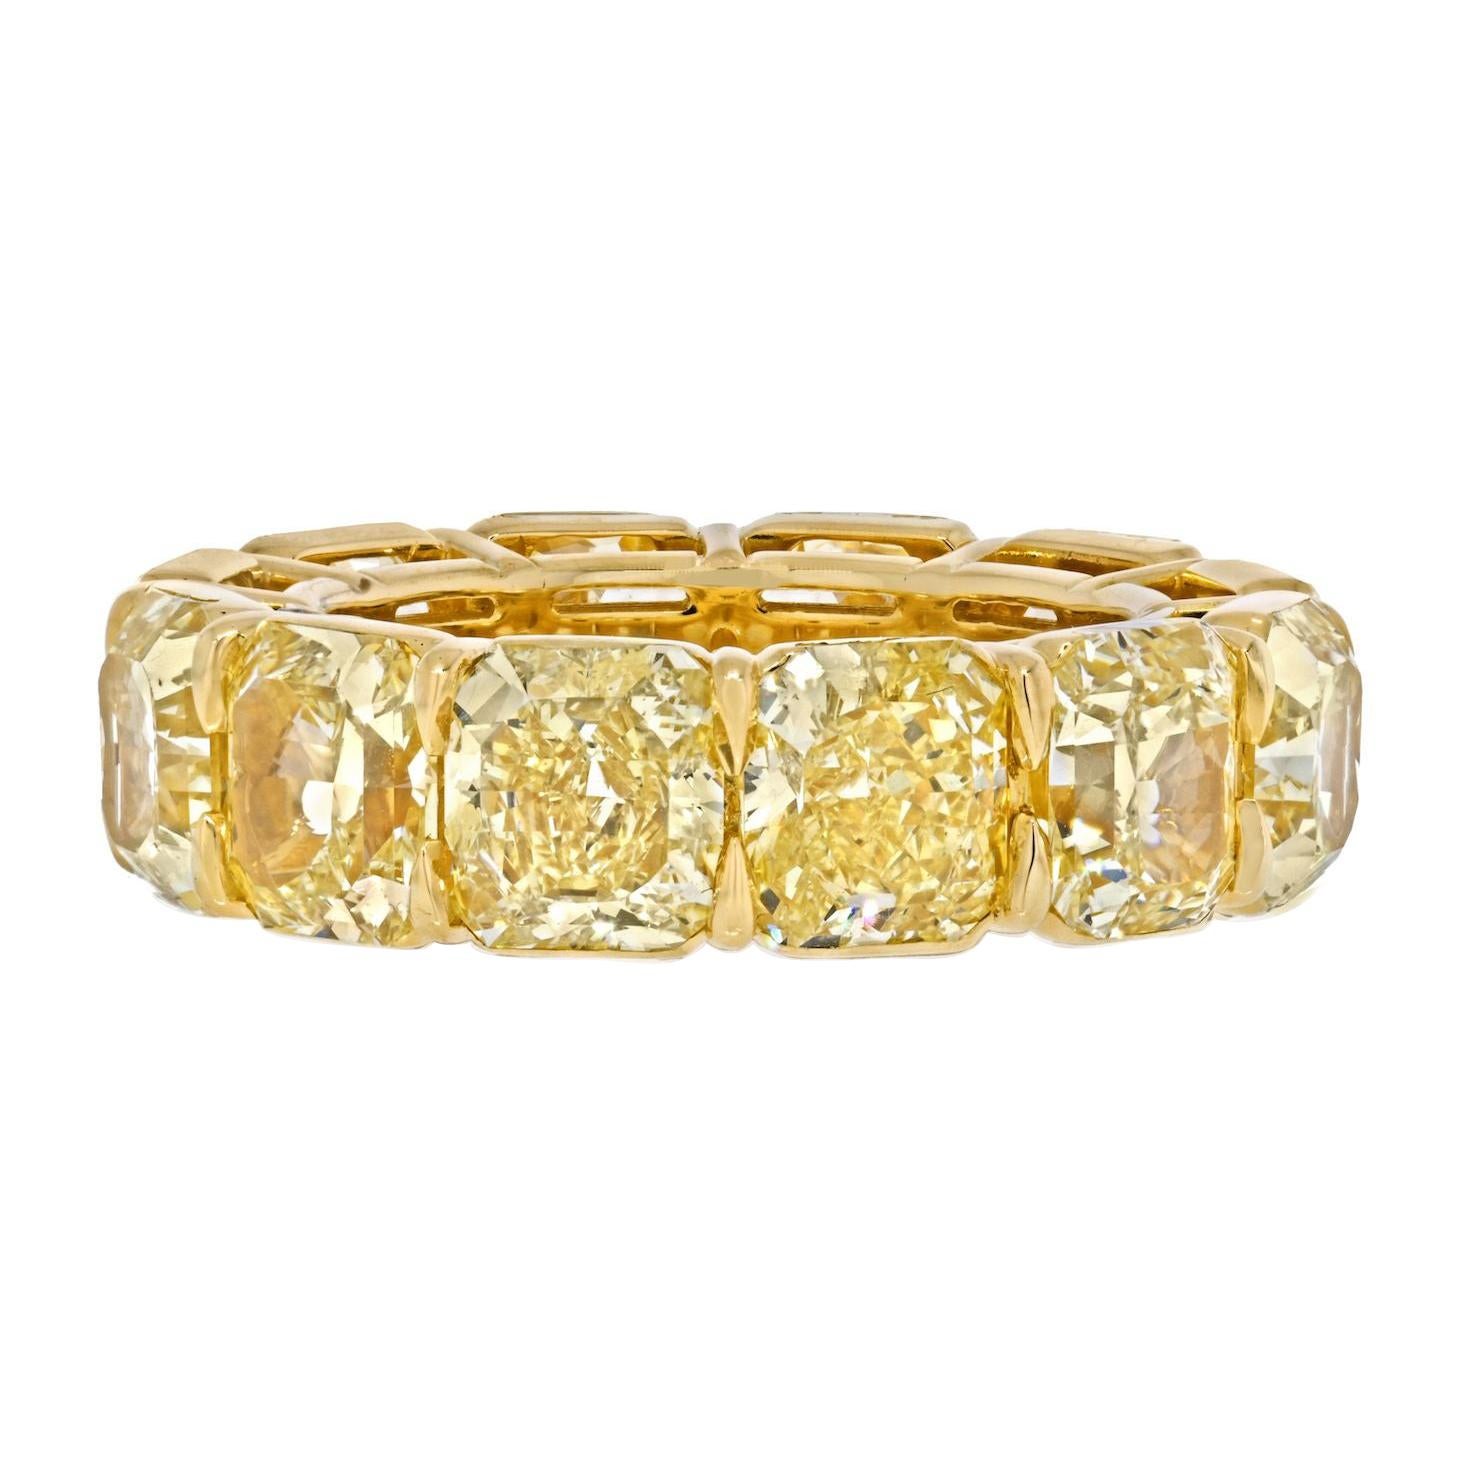 15 Carat 18K Yellow Gold Radiant Cut Fancy Yellow Diamond Eternity Band.
Mounted with 12 GIA certified diamonds. Finger size: 6.75. 
Color: Certified fancy yellow
Clarity: all certified VVS2 through SI1 
Certificates: GIA 

Dazzling diamond eternity